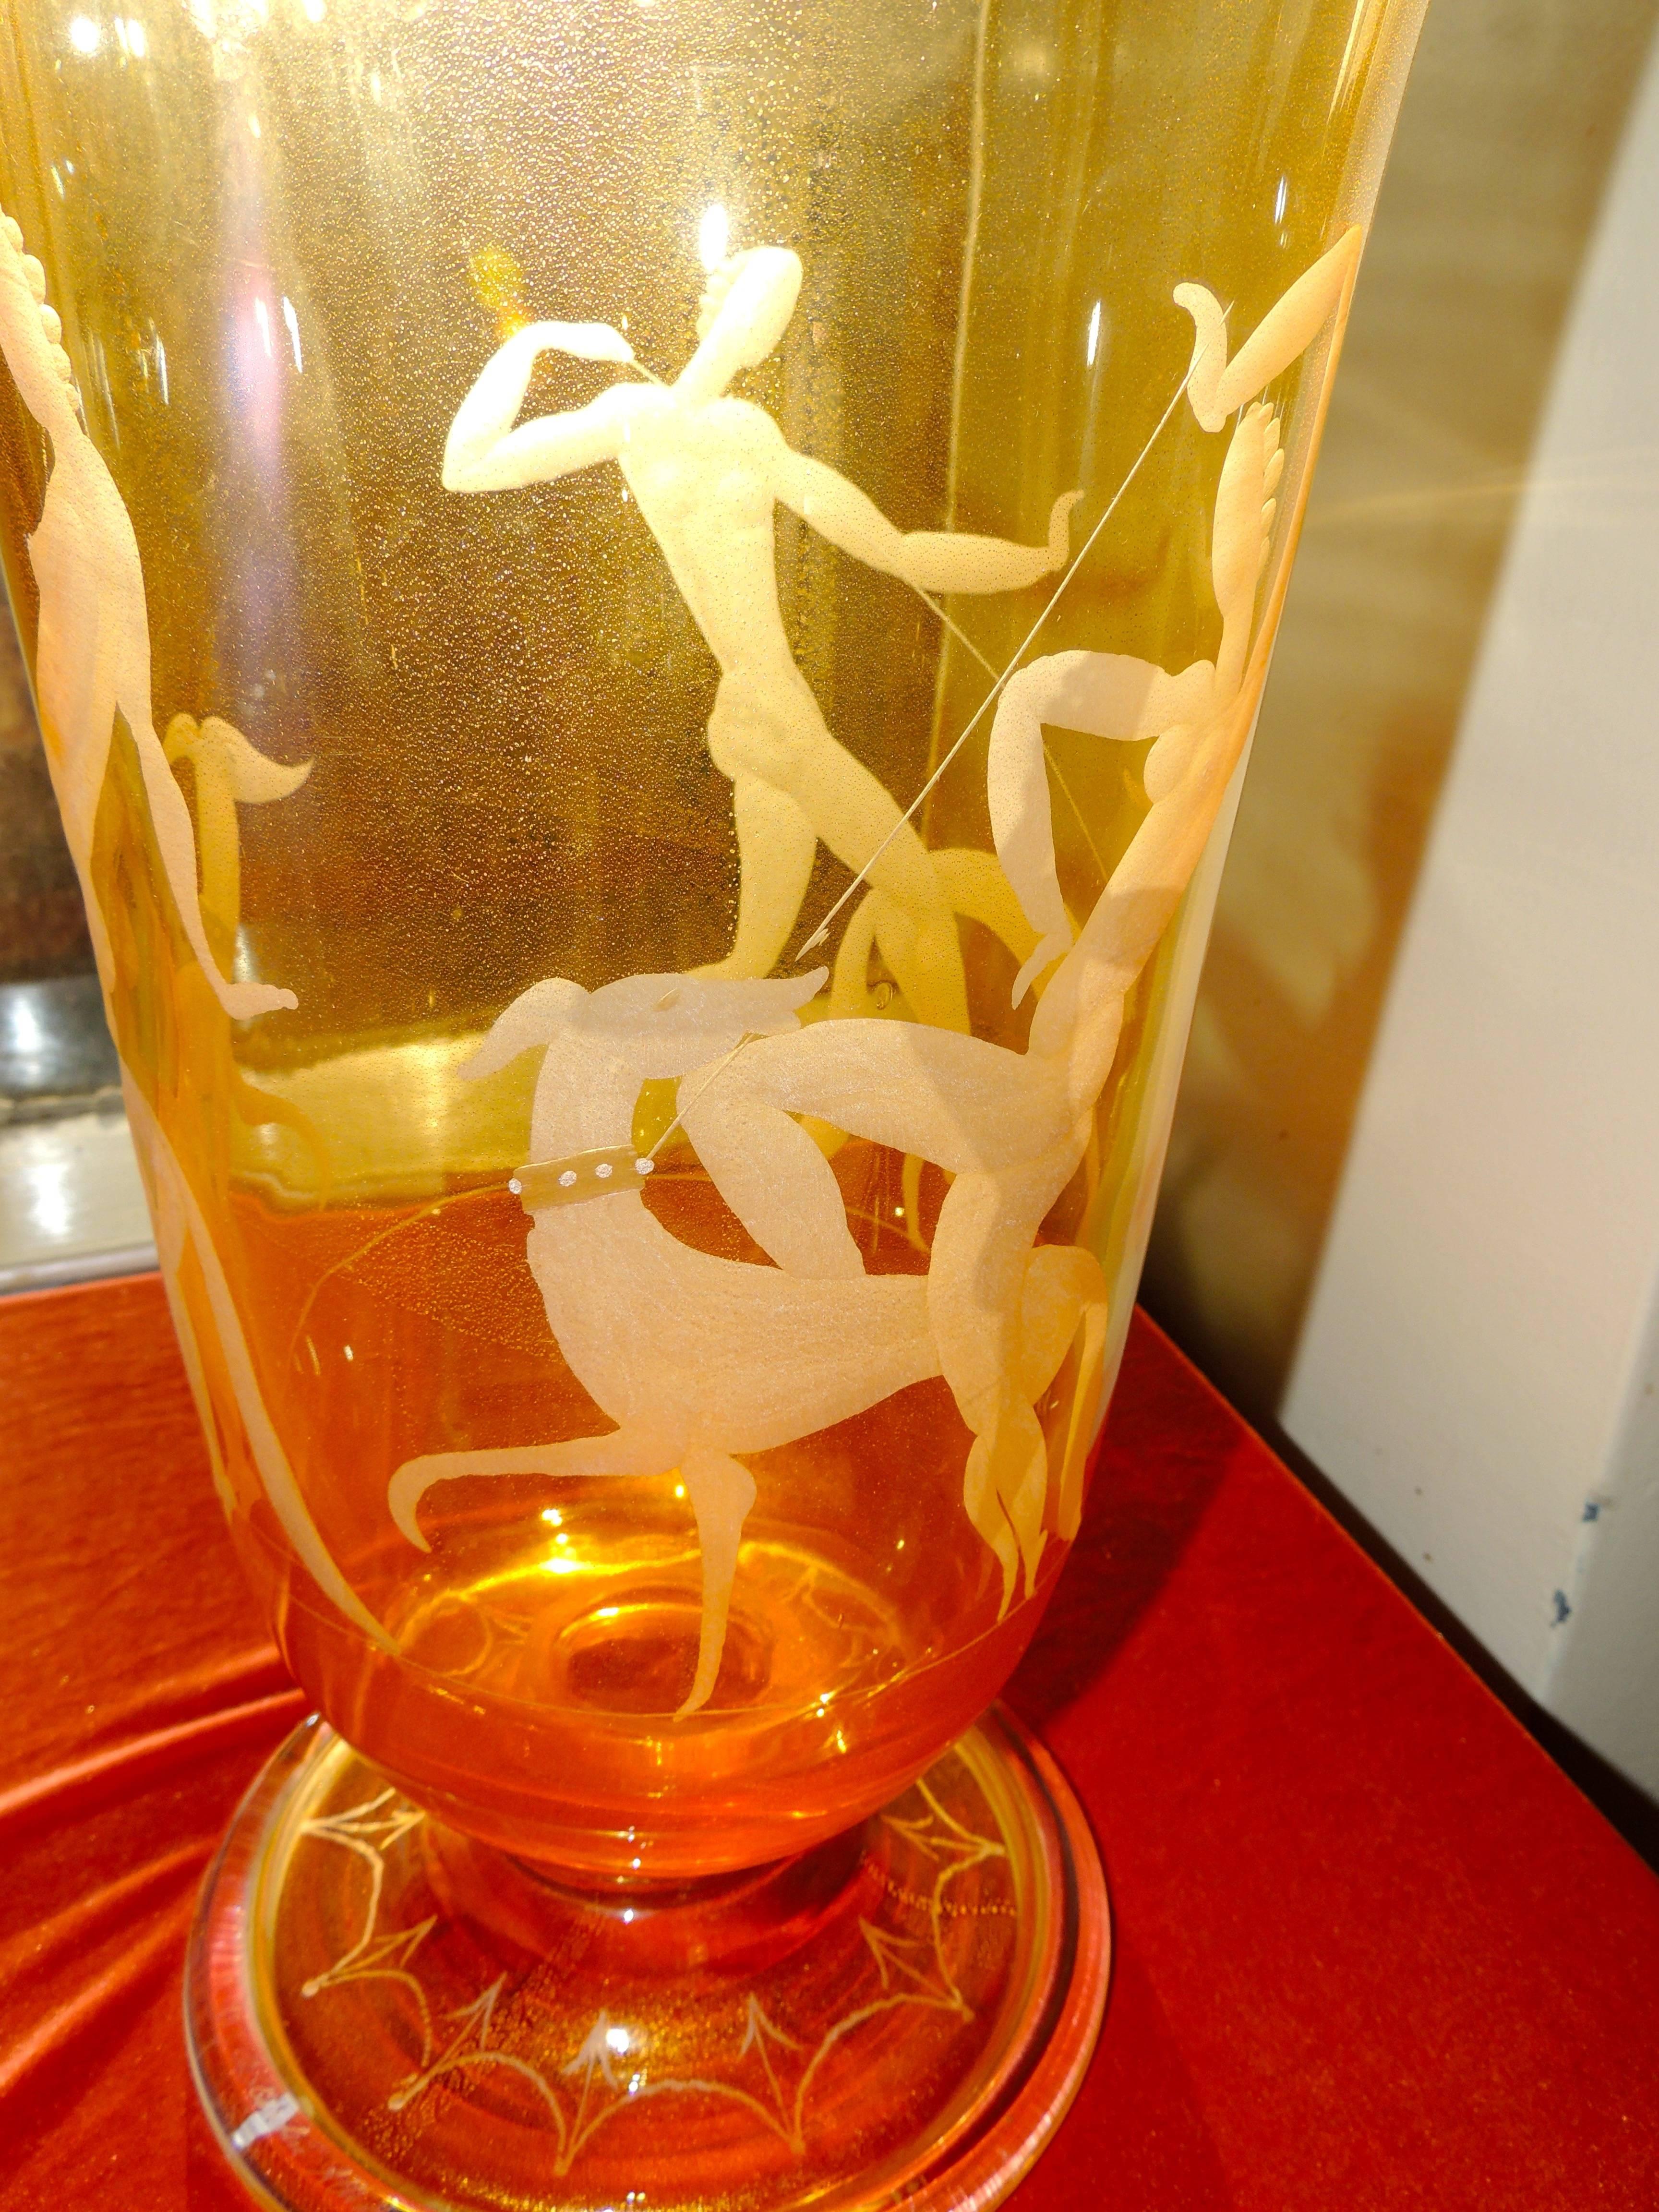 Mid-20th Century Art Deco Etched Glass Vase with Stylized Women and Dogs